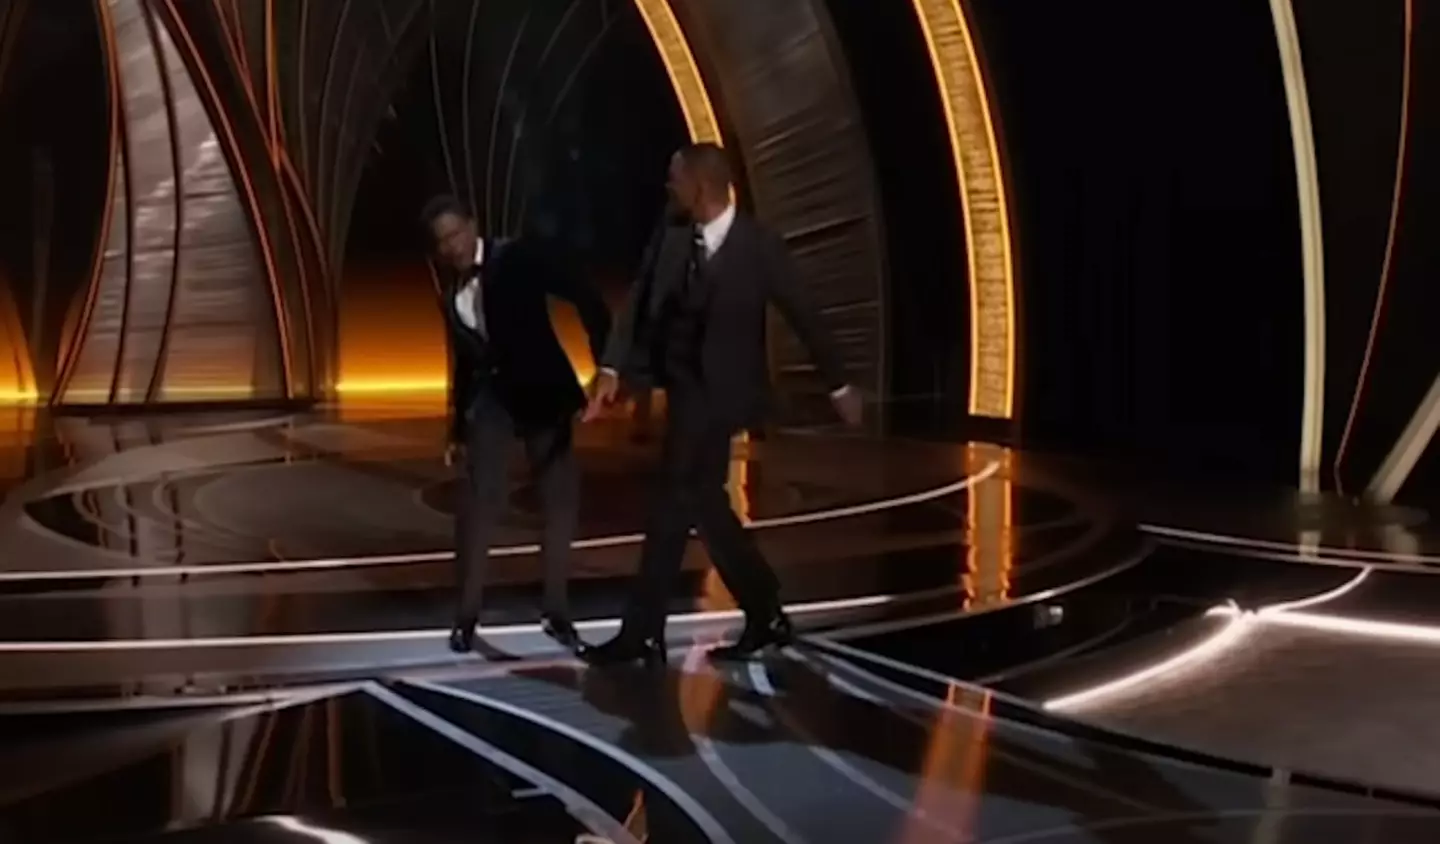 Will Smith went viral around the world for his Oscars slap.